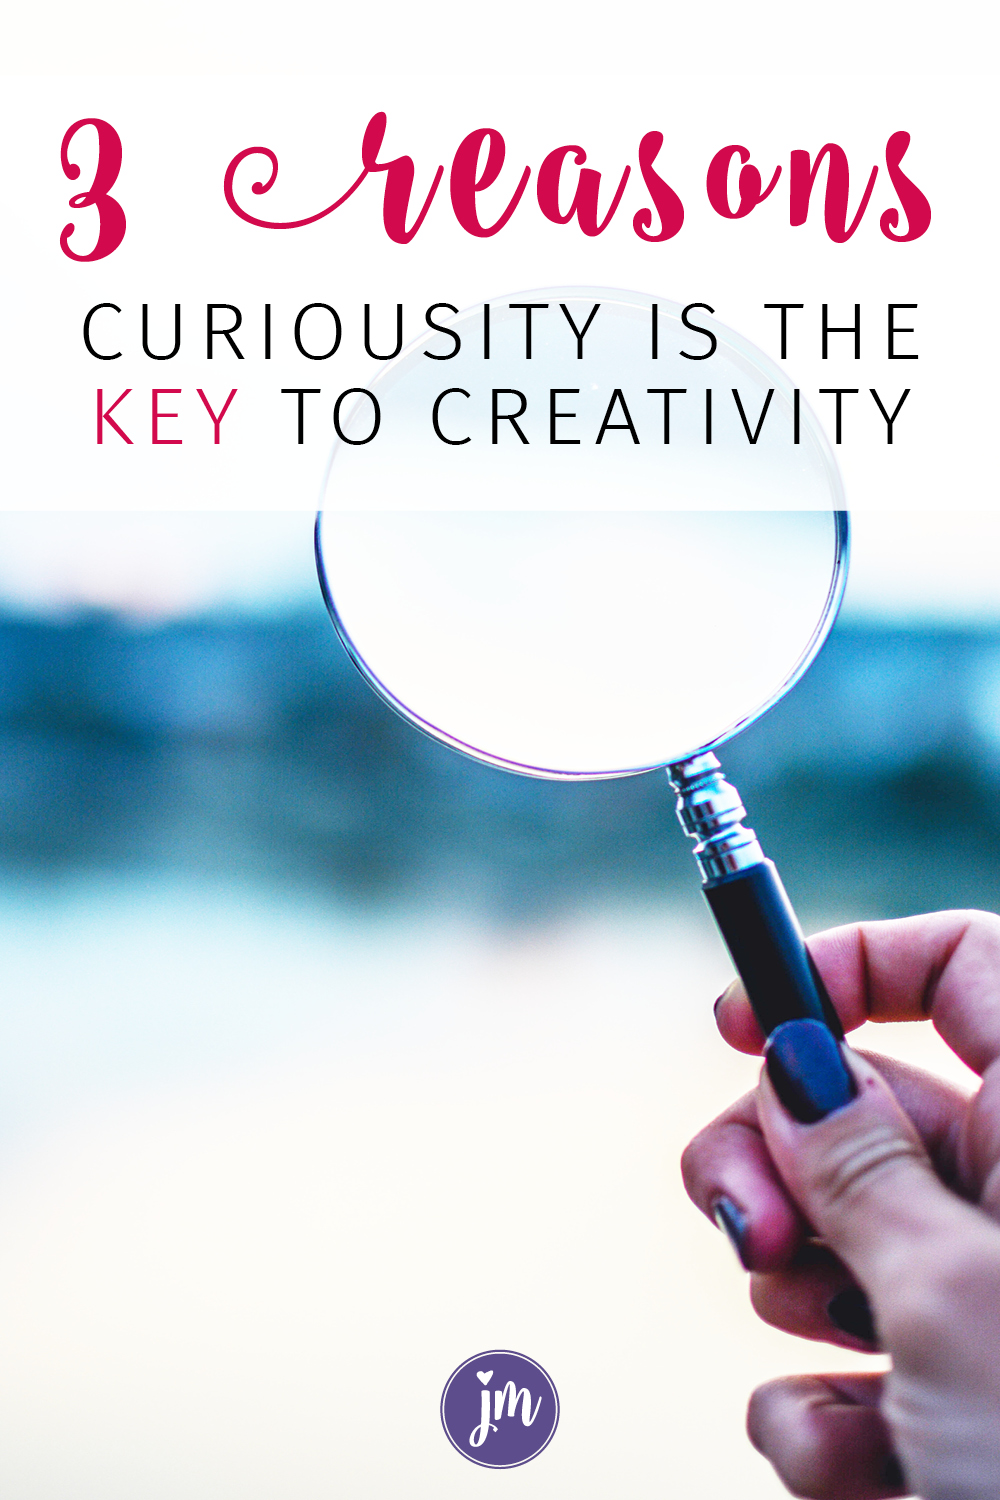 Want to get out of a creative slump? Then get curious! Curiousity is a proven method to increase your creative potential. Learn why...